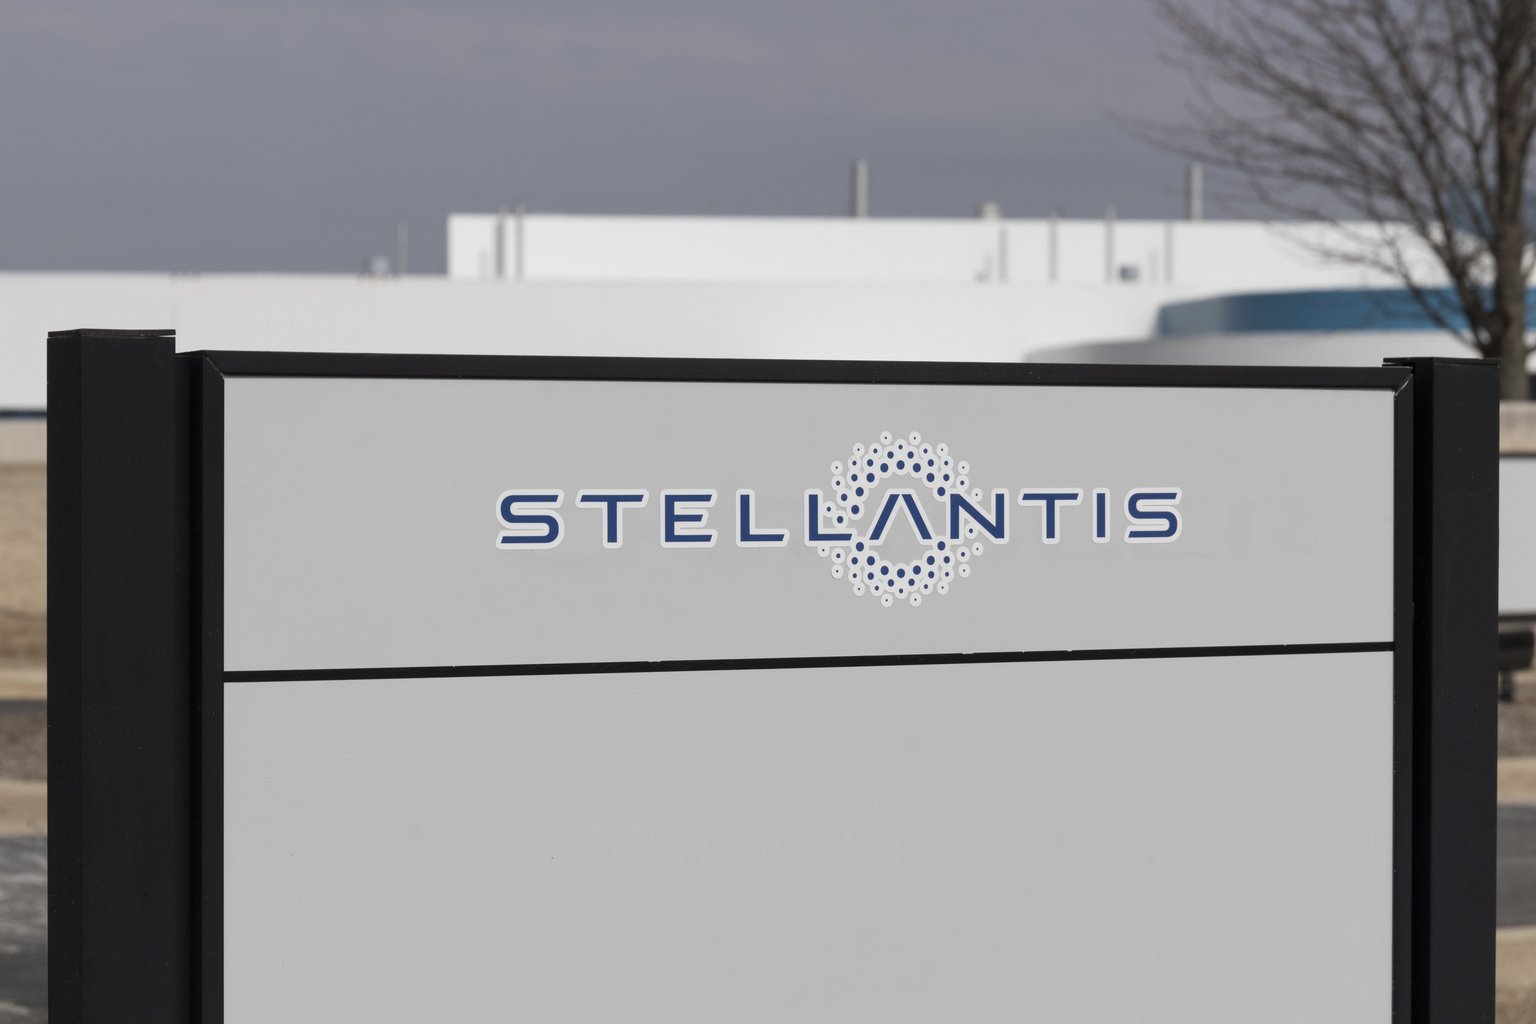 Stellantis makes investment in lidar technology with help of venture fund